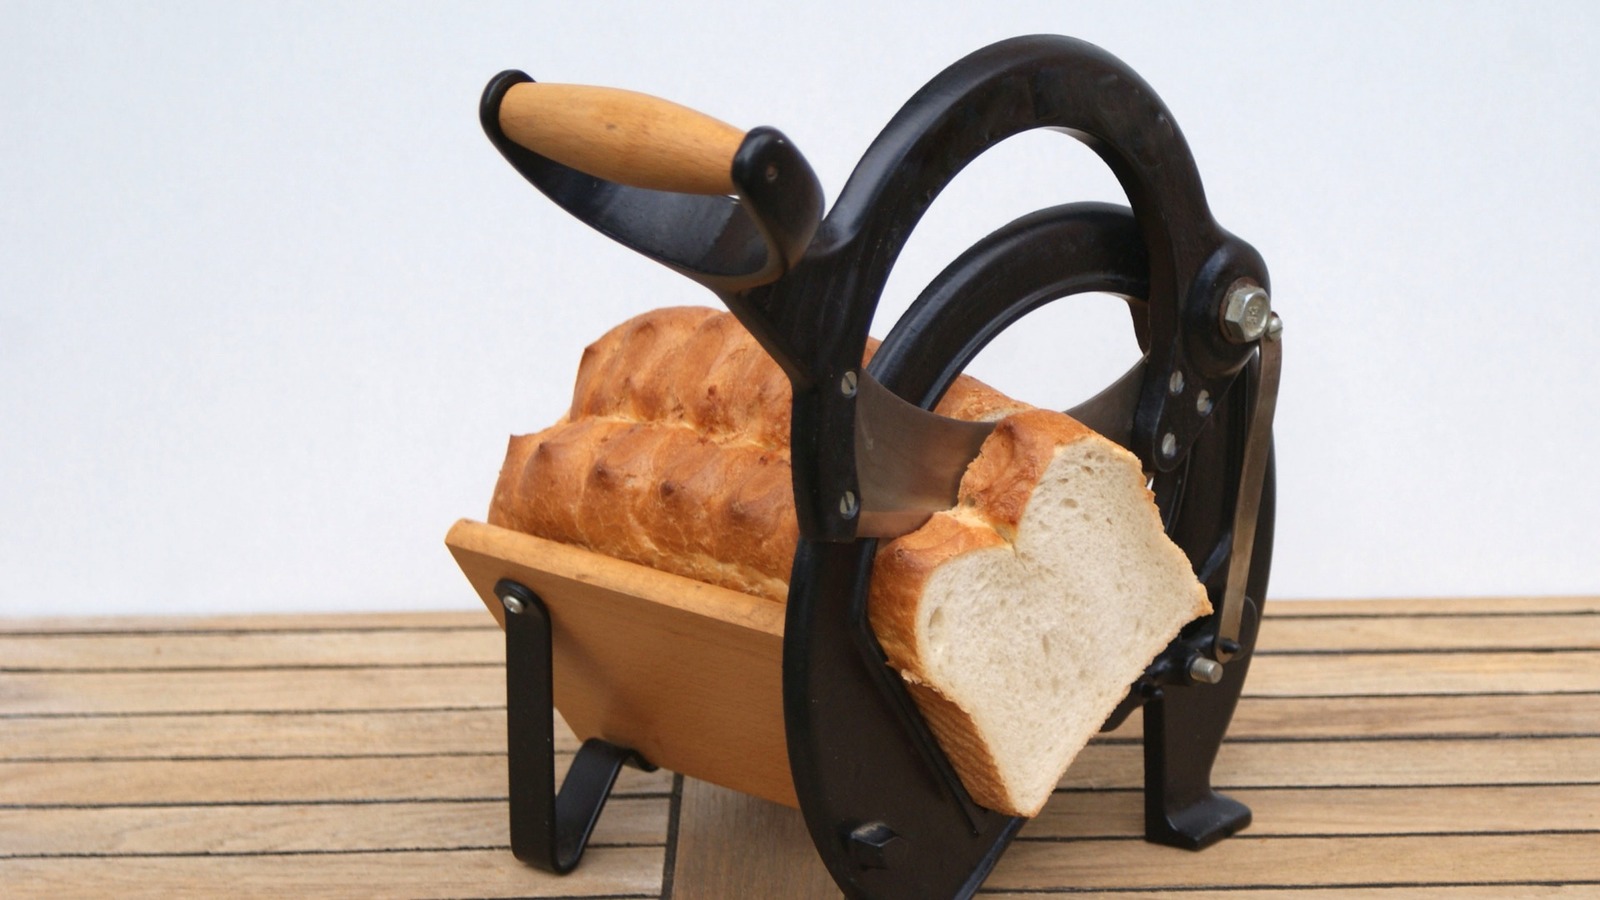 https://www.foodrepublic.com/img/gallery/vintage-bread-slicers-should-require-a-license-to-use/l-intro-1701798146.jpg